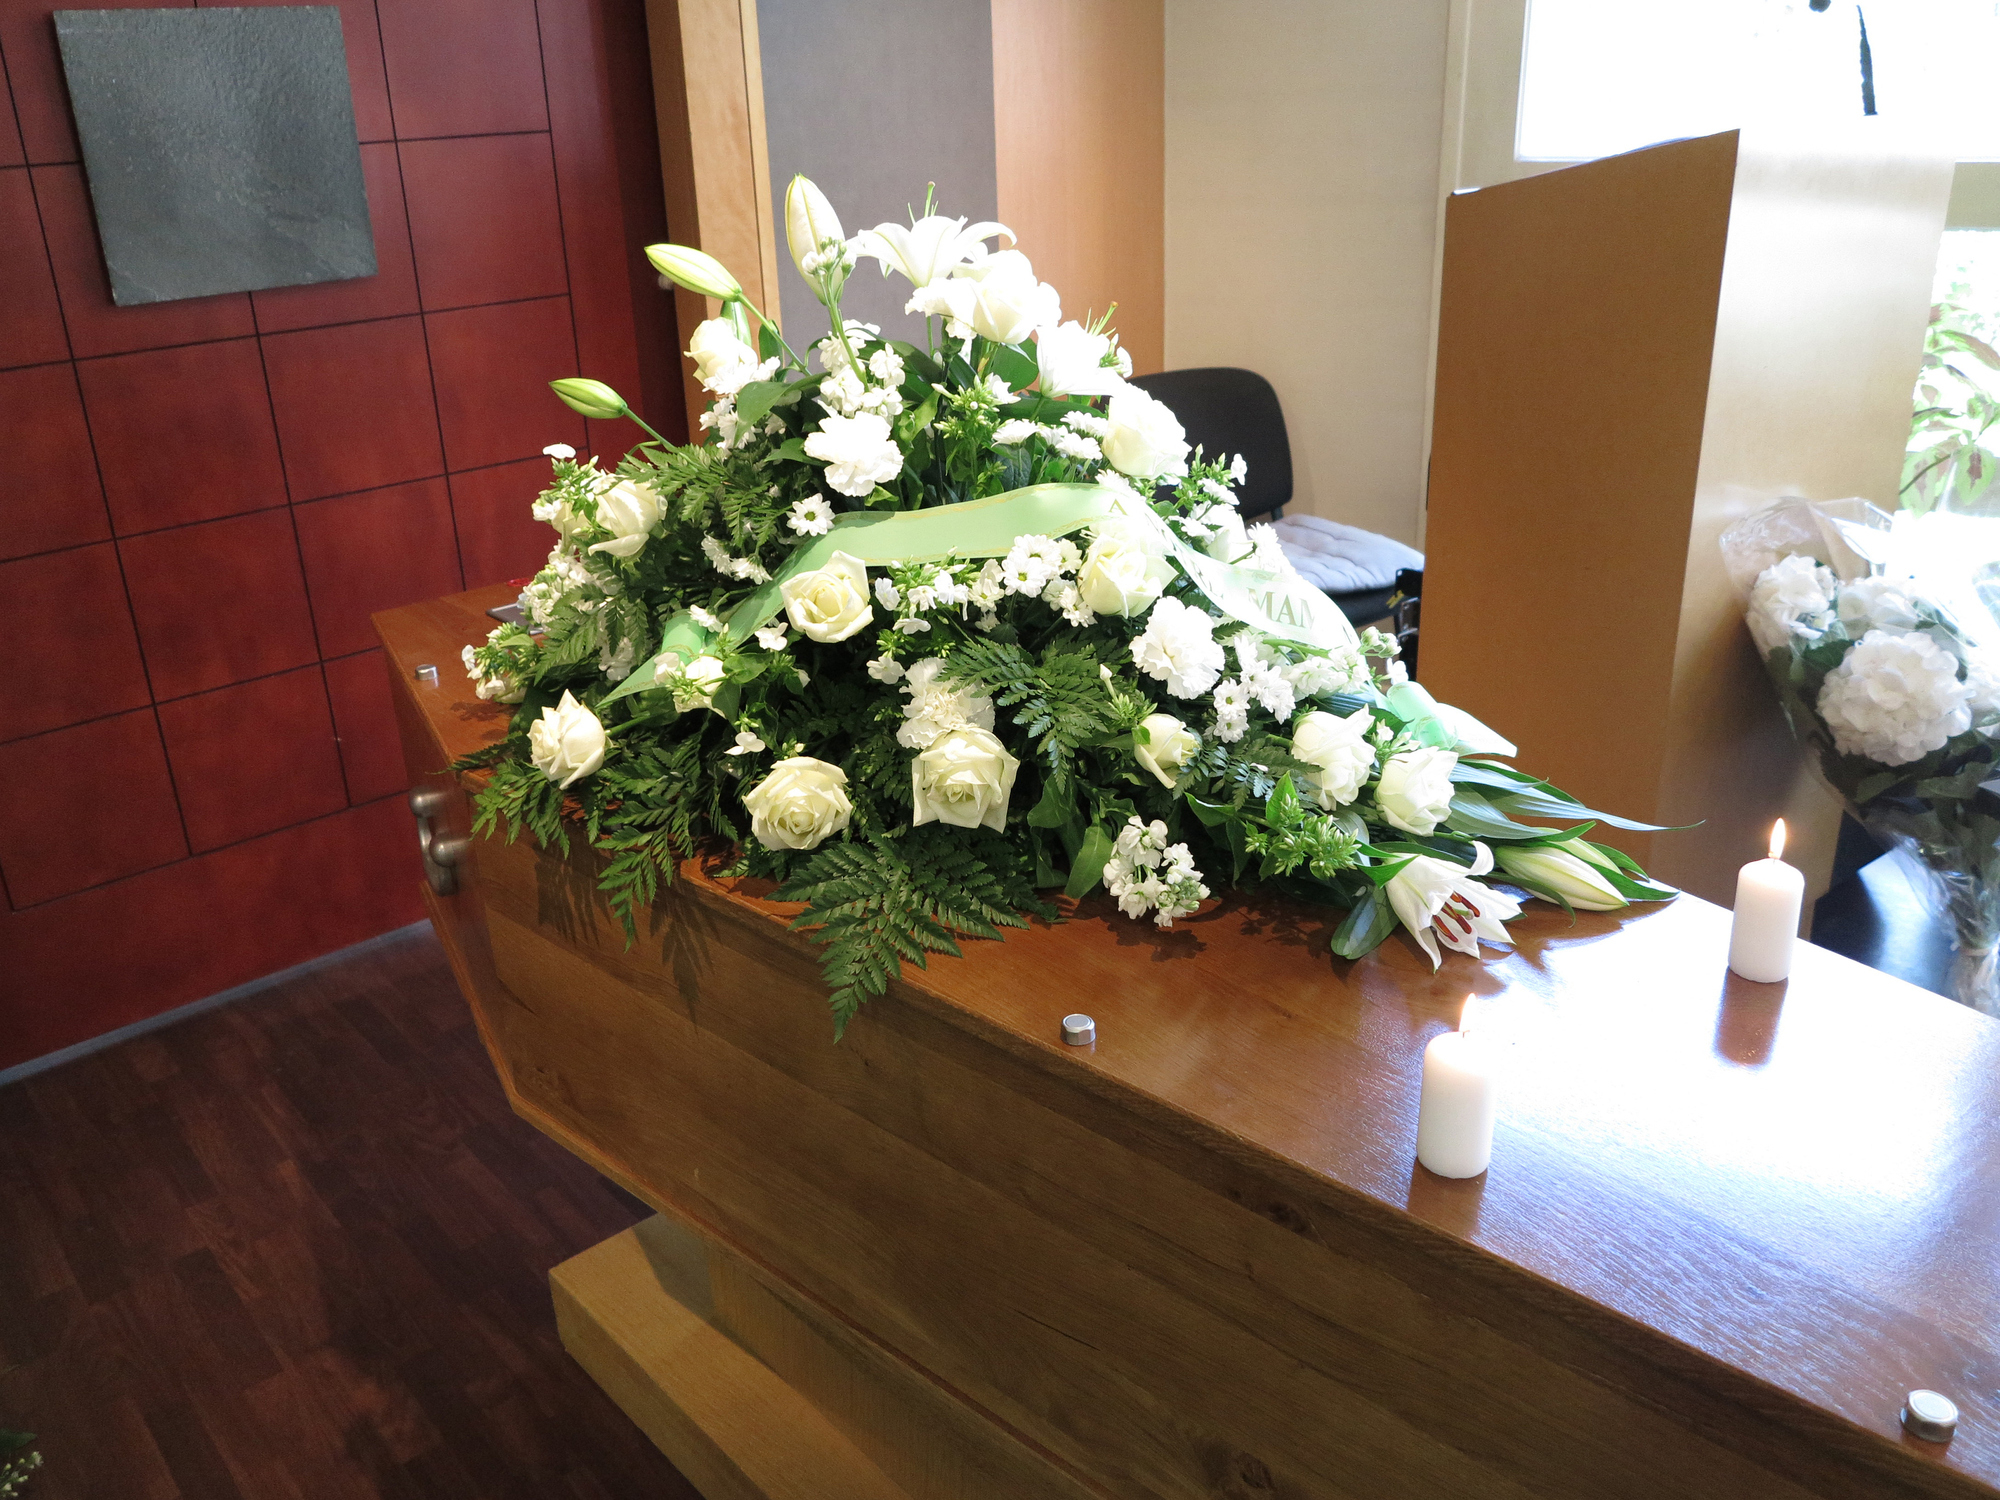 A closed wooden casket with white floral arrangements on top, flanked by lit candles, in a room